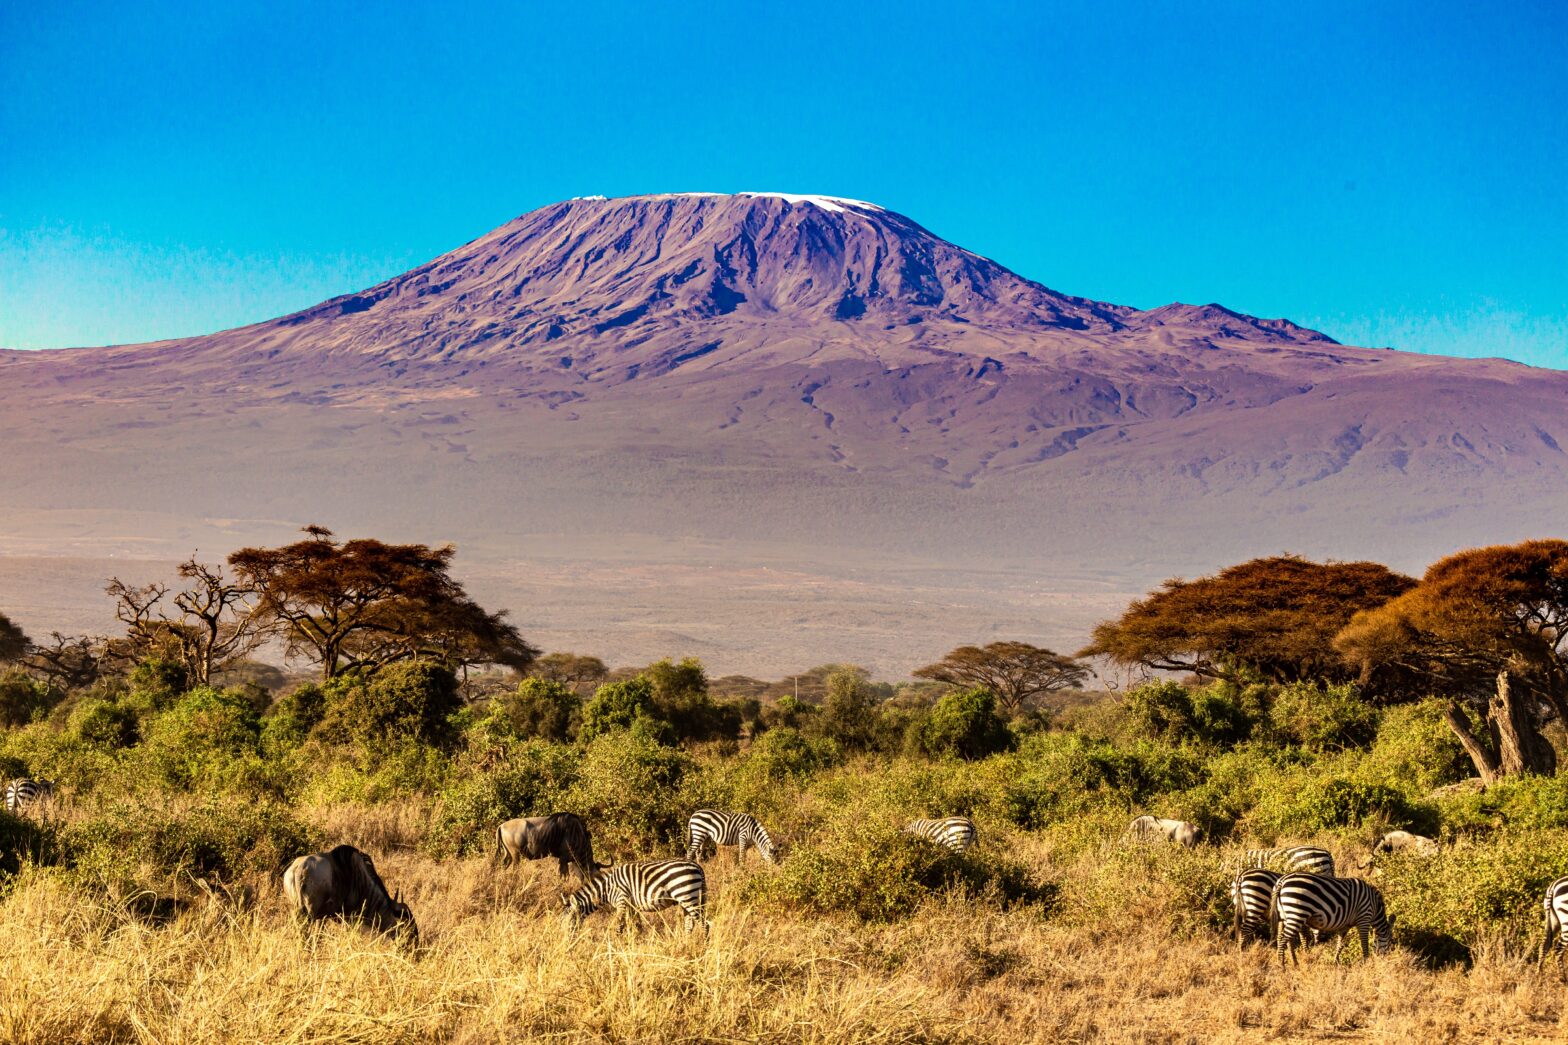 Is Kilimanjaro On Your Bucket List? Here's How You Can Conquer Africa's Tallest Peak